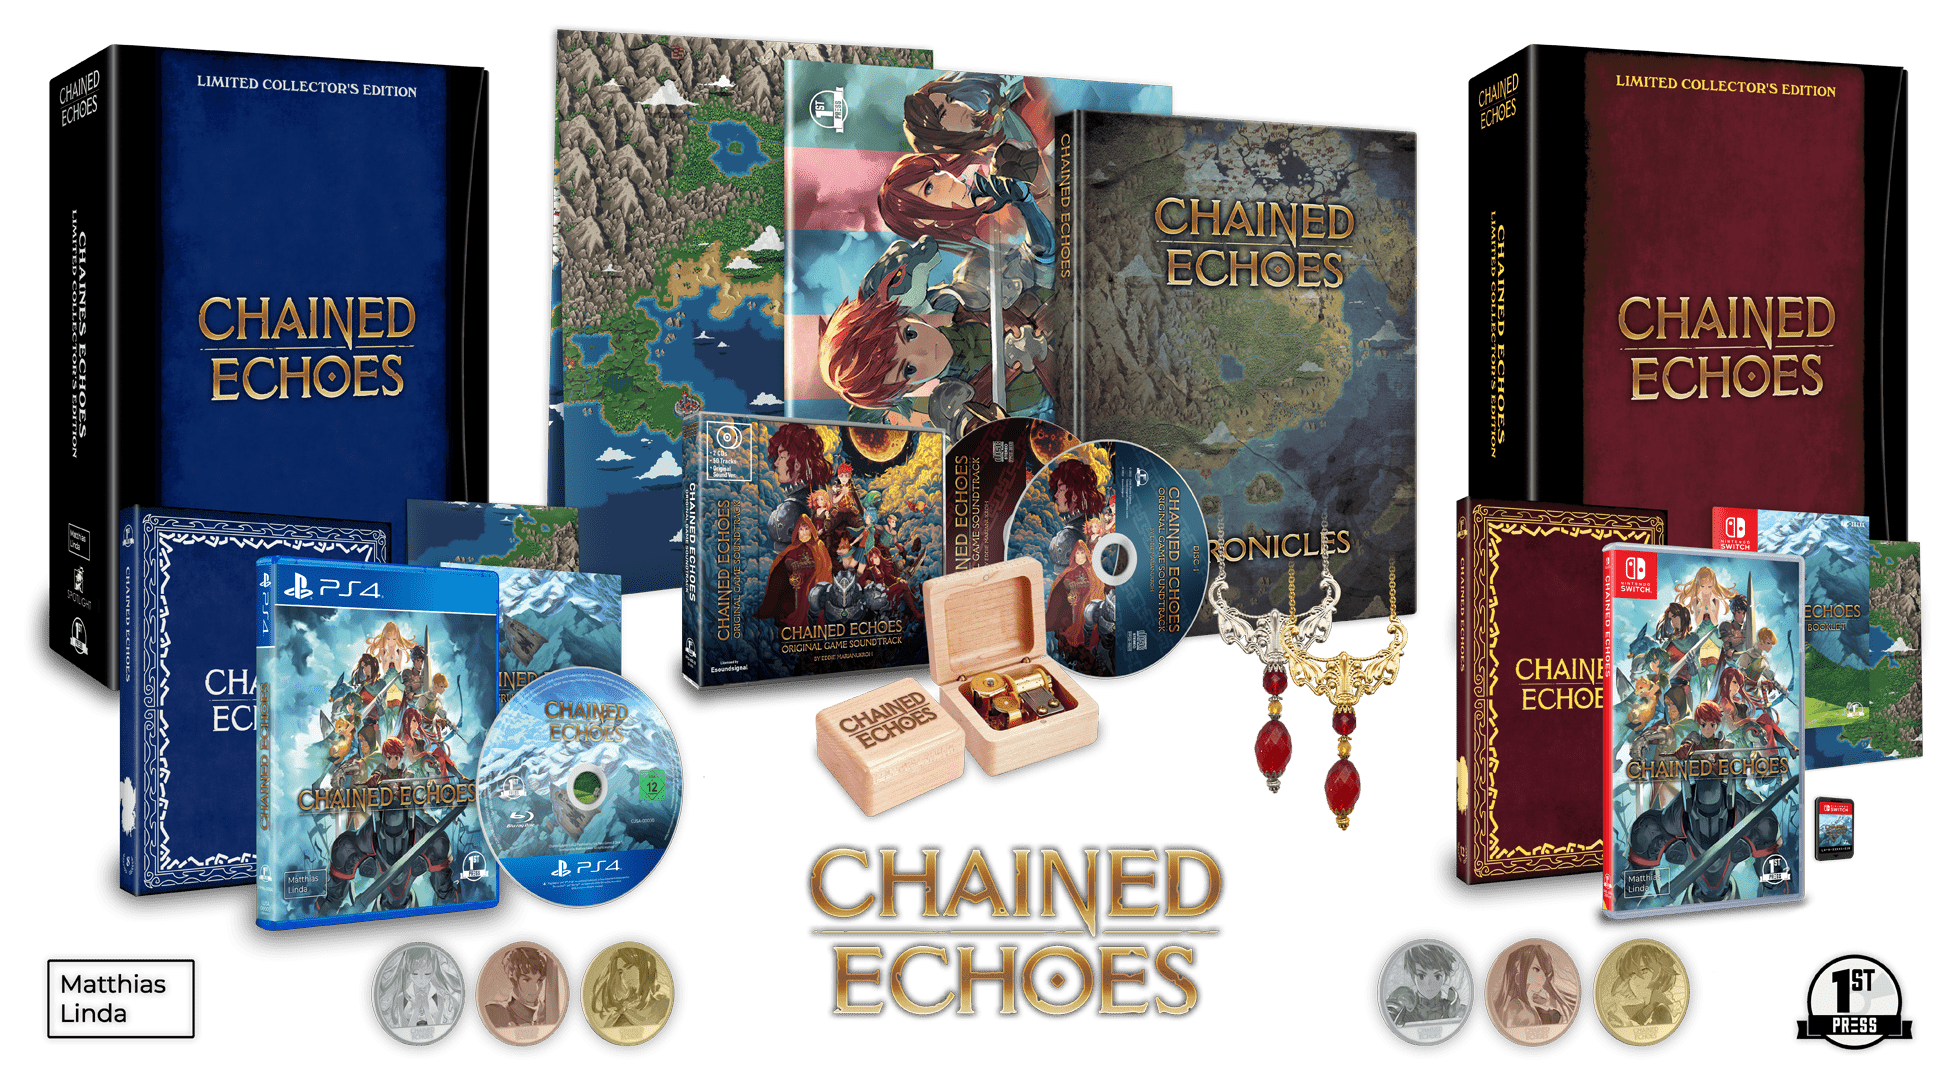 Chained Echoes dev shares the many classic inspirations behind the game